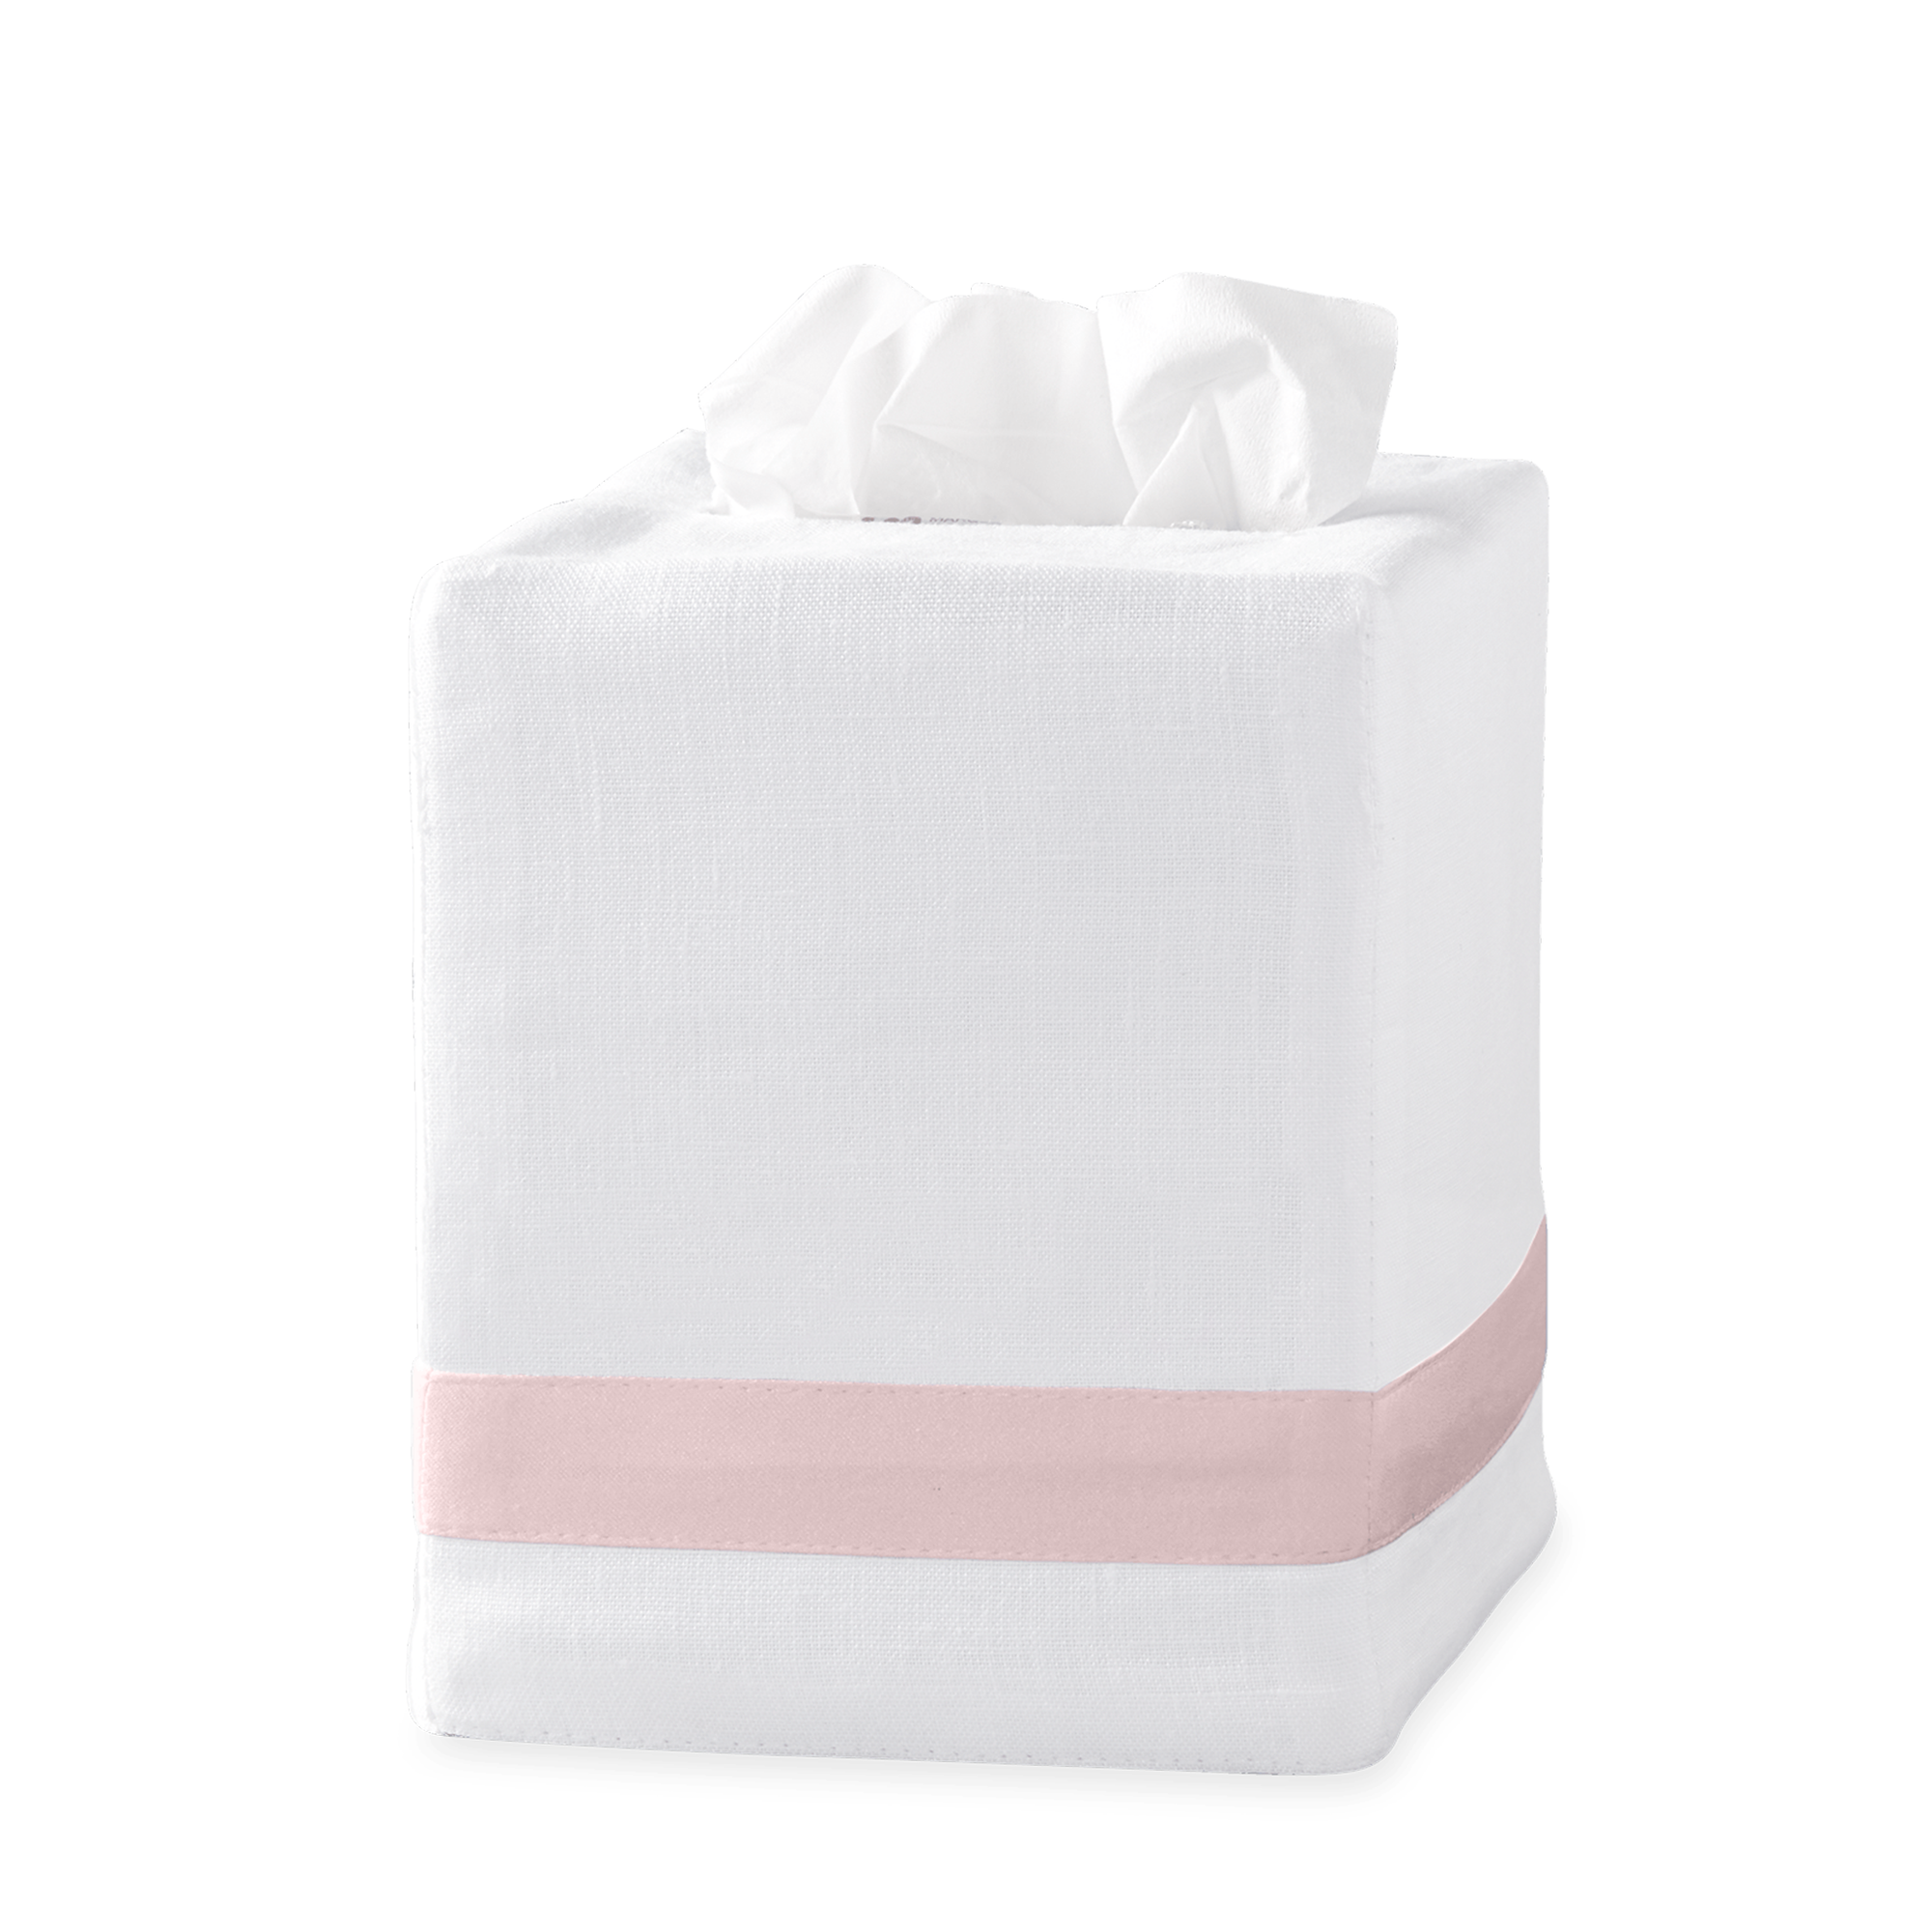 Silo Image of Matouk Lowell Tissue Box Cover in Color Pink